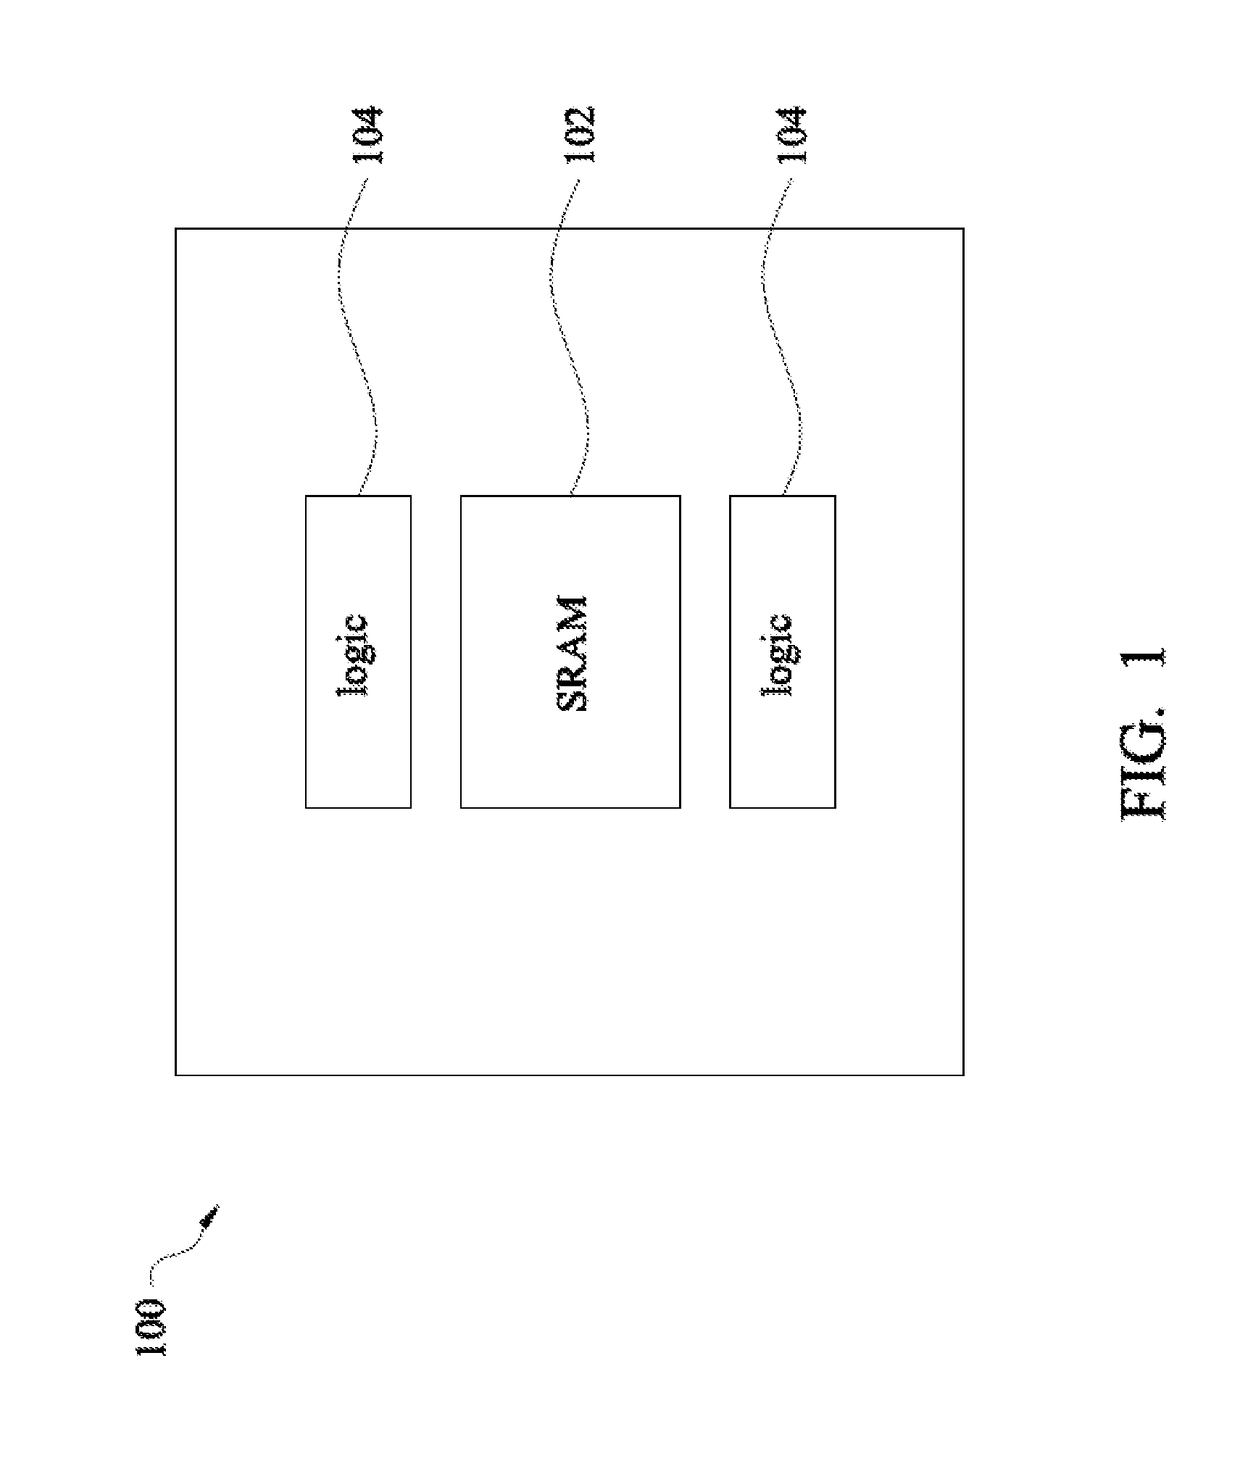 Two-port SRAM connection structure